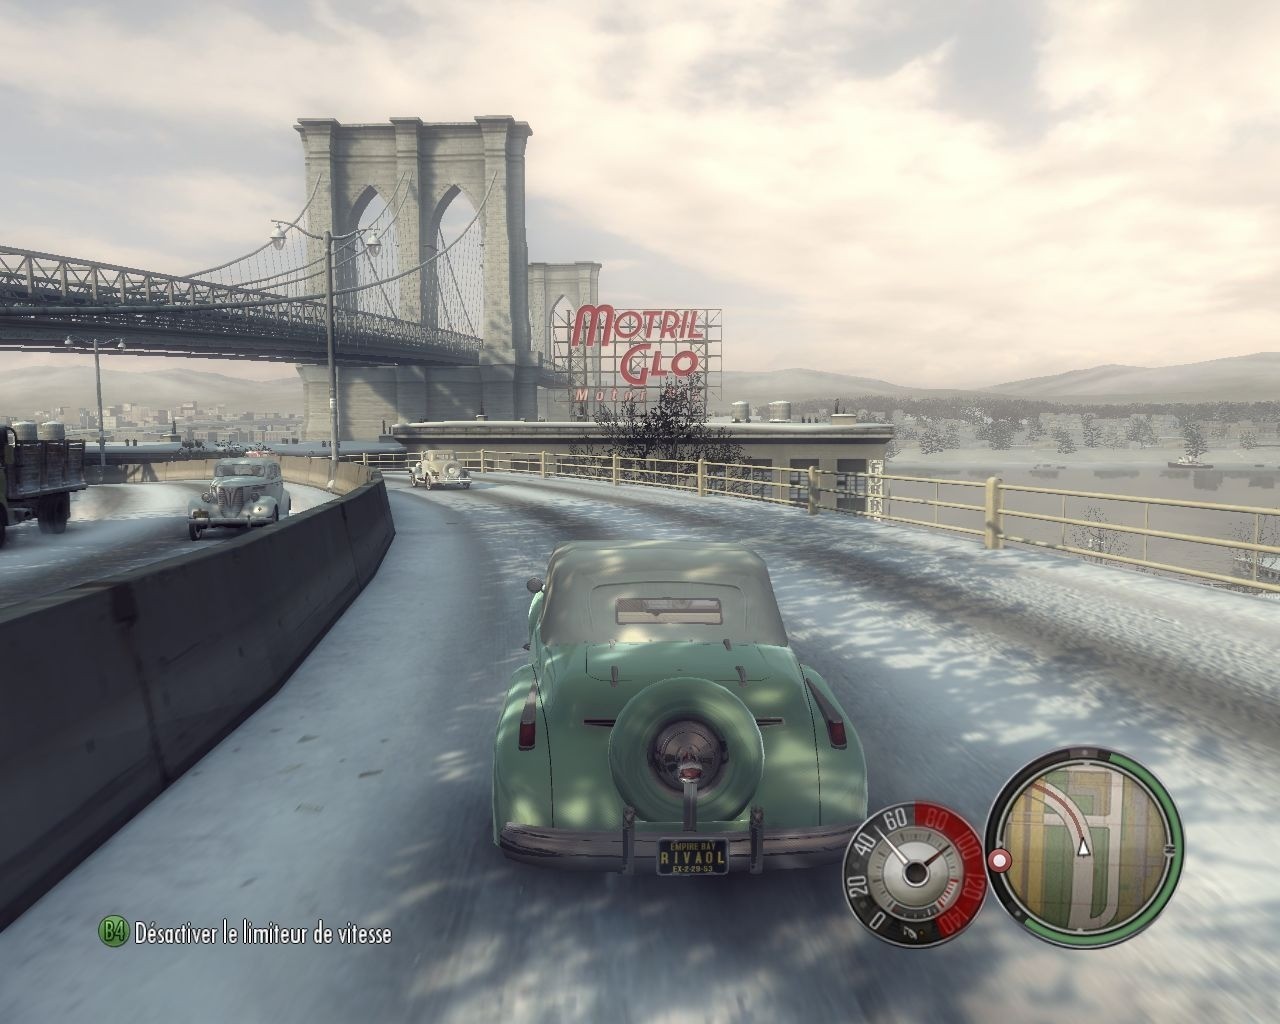 Mafia II: Definitive Edition PC System Requirements – 2K Support